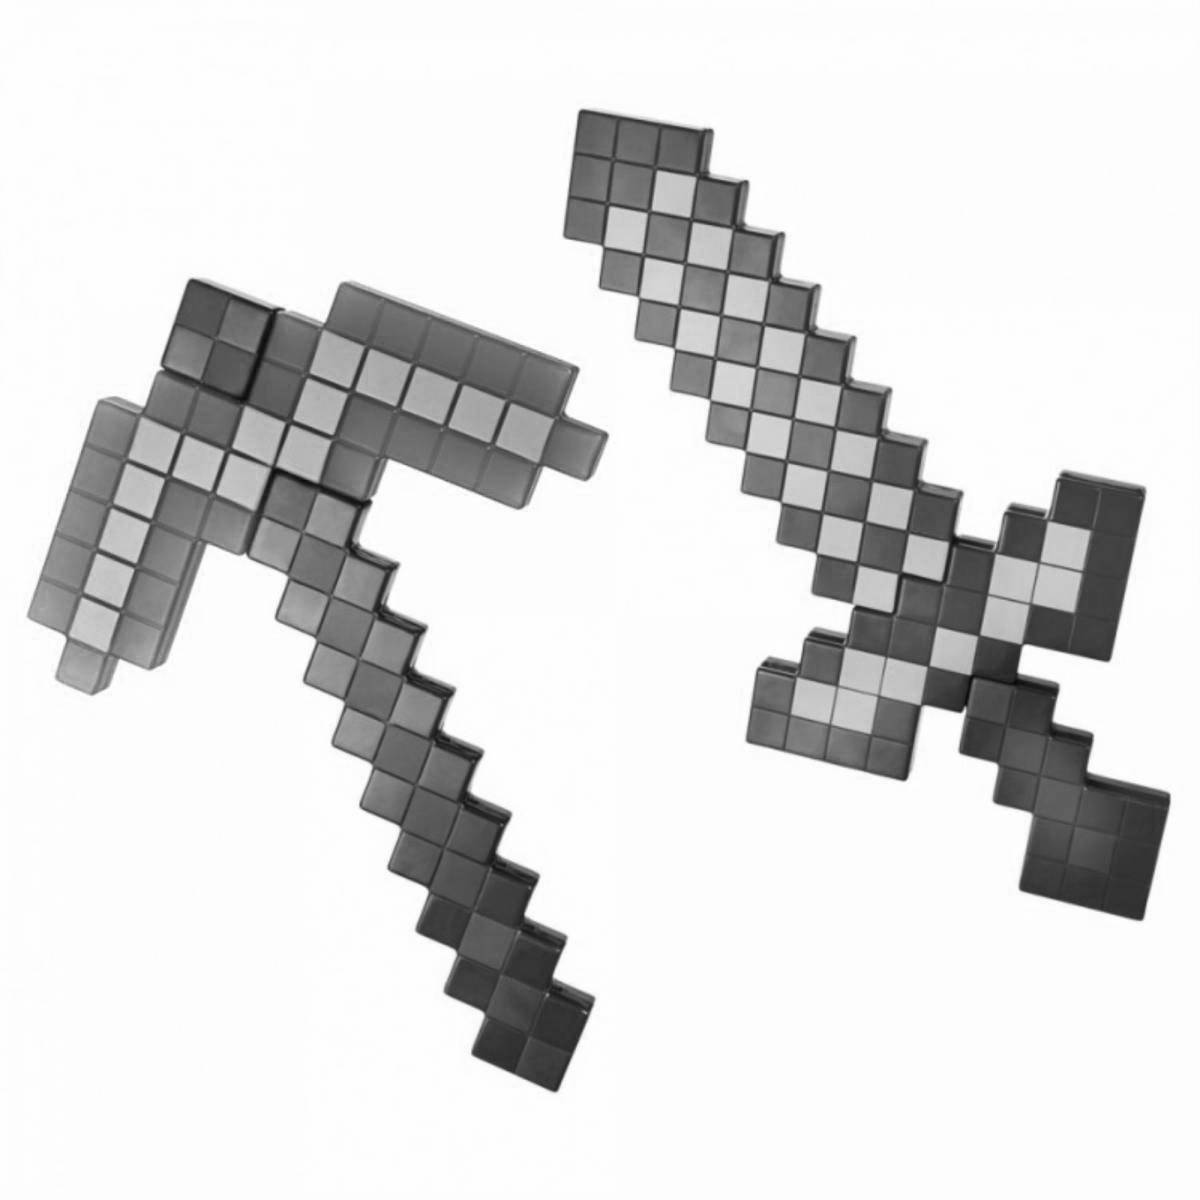 Awesome minecraft sword and pickaxe coloring page